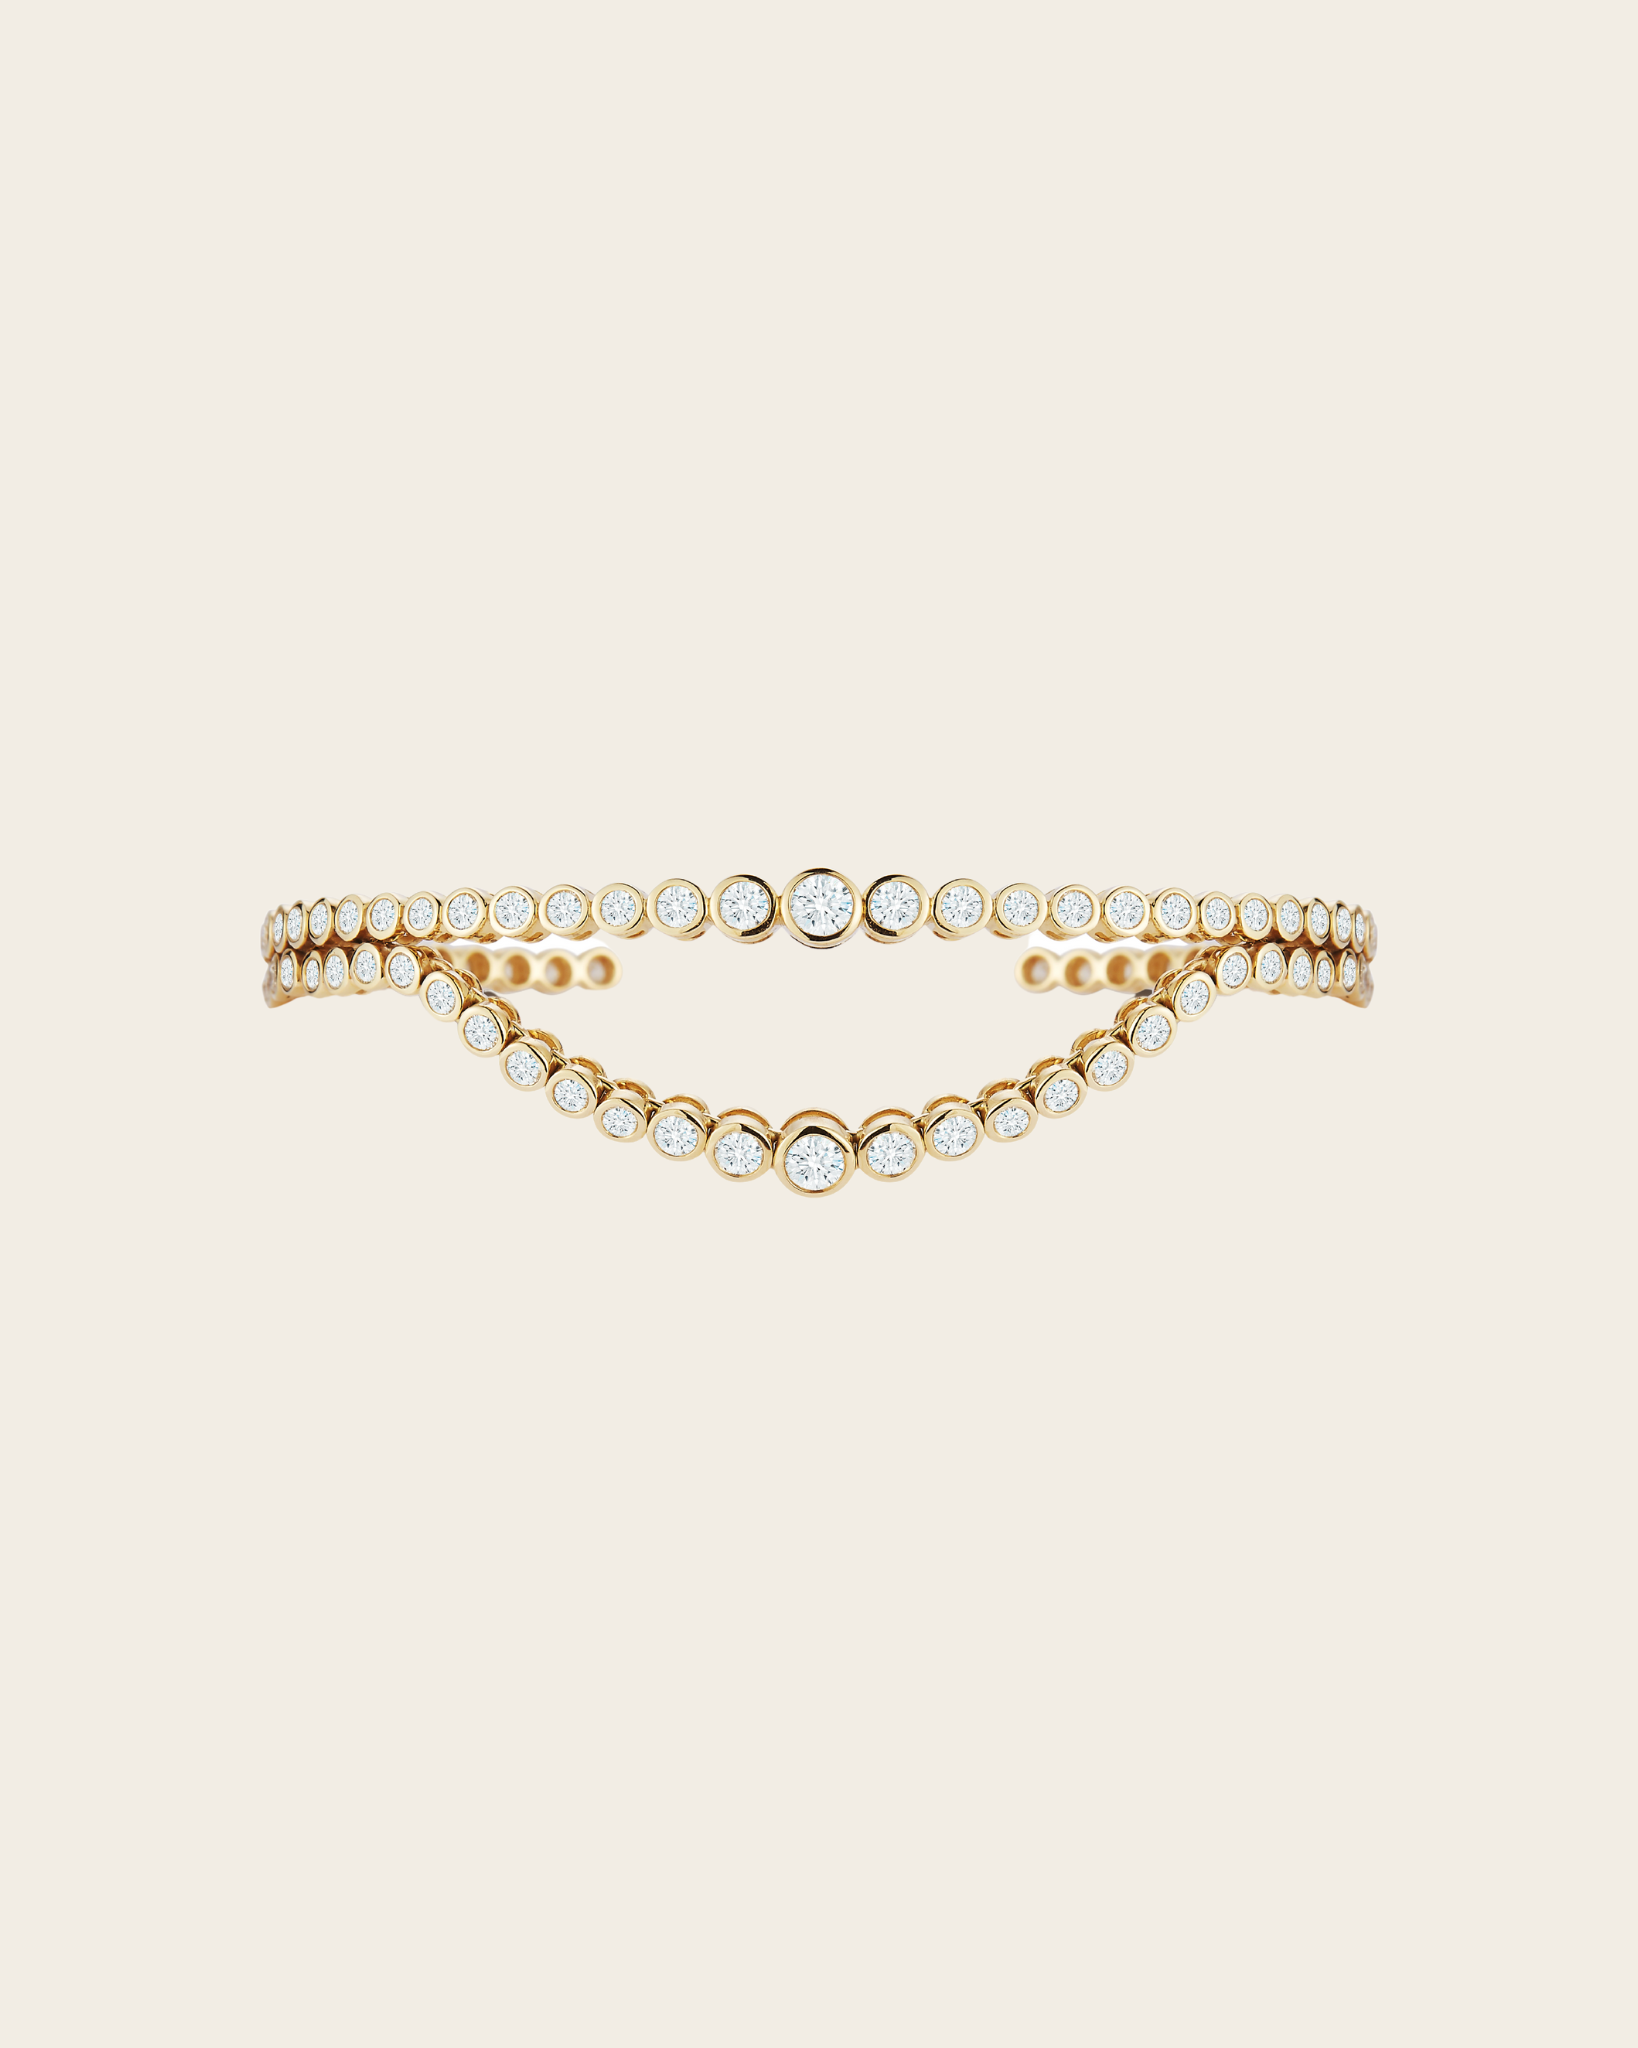 Double row bezel-set diamond bracelet with one row of articulated draped diamonds, 18kt yellow gold, with invisible side hinge.  18kt Yellow Gold 2.95 Total Diamond Carat Weight SI / H Min. Diamond Quality Invisible side hinge opening Handmade in Thailand